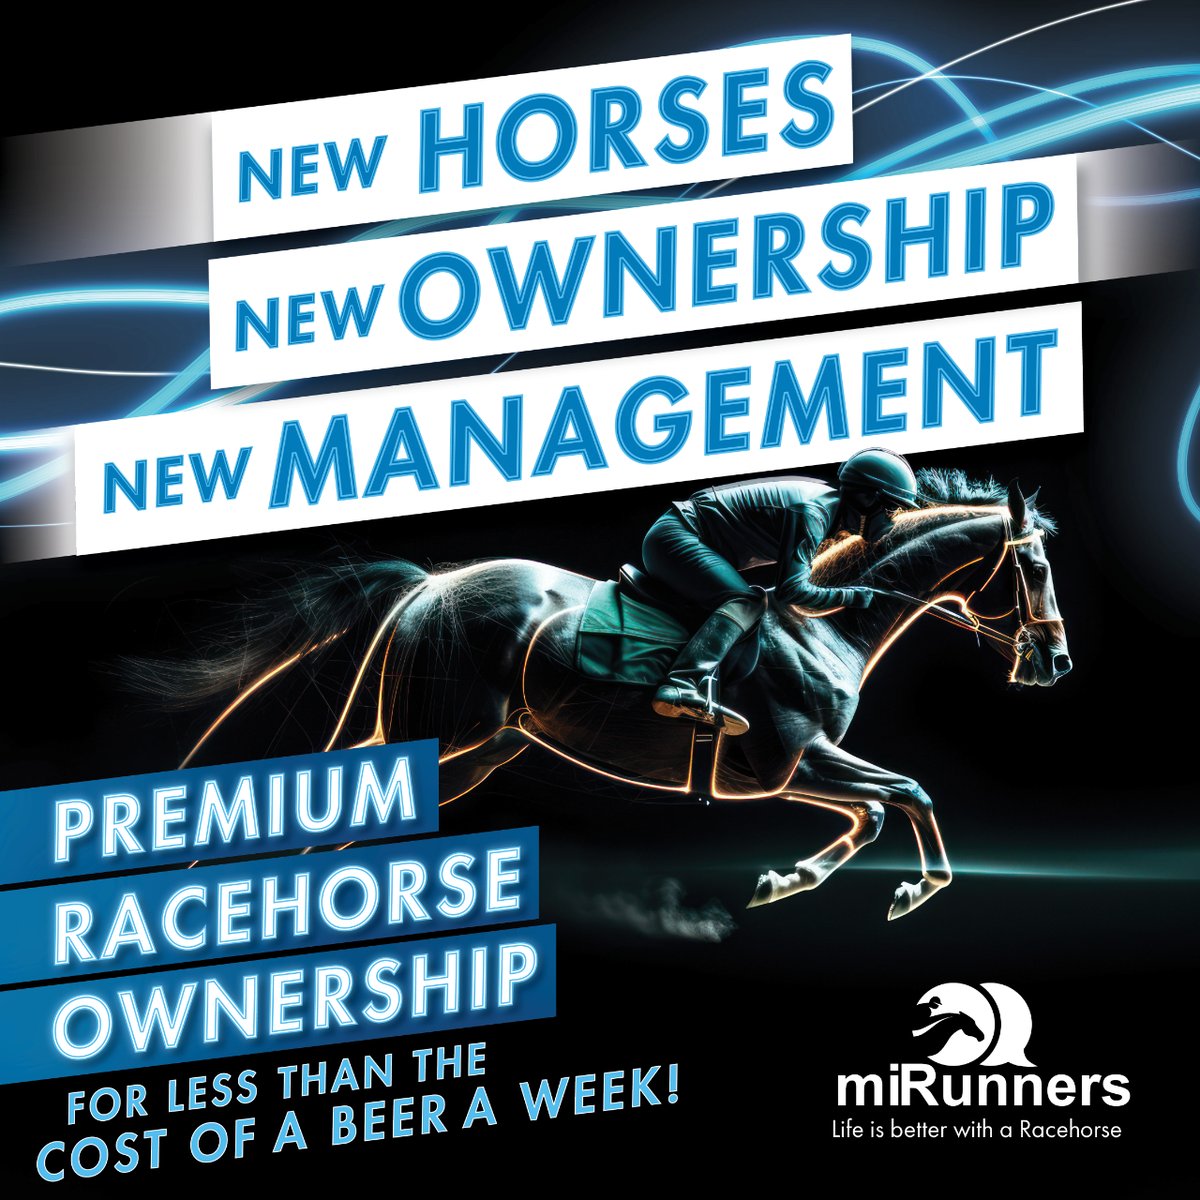 Embrace the new era of miRunners!  New horses, ownership and management mean new opportunities for our community of owners! 🏇 Get onboard and start your journey with miRunners for less than the cost of a beer a week! 🍻 #lifesbetterwitharacehorse #racingaustralia #buyahorse